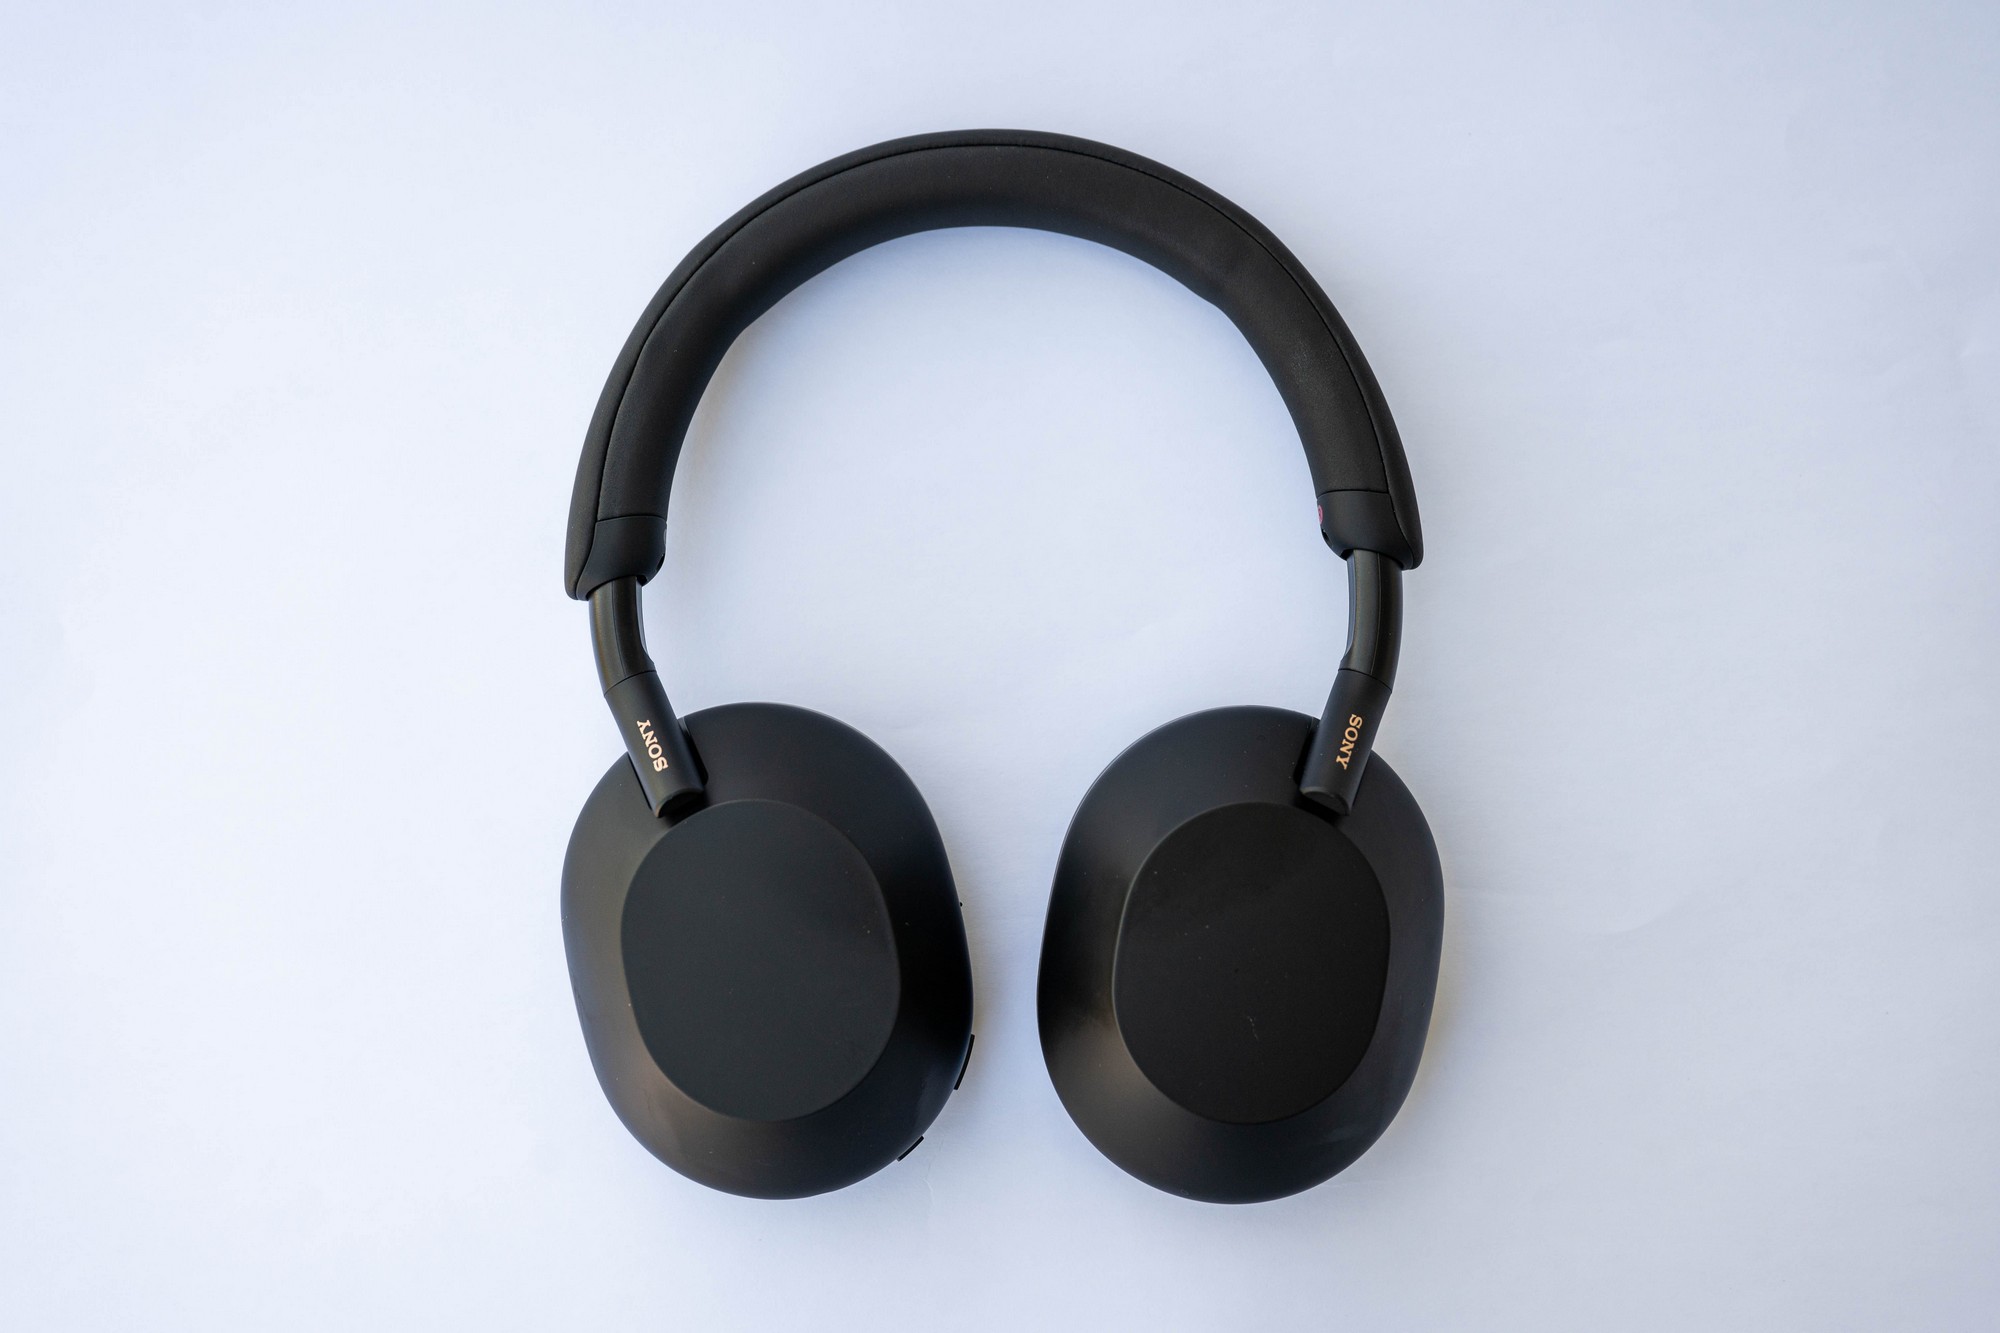 Sony WH-1000XM5 -- Best over-ear noise-cancelling headphone (tie with Bose QuietComfort Ultra Headphones)